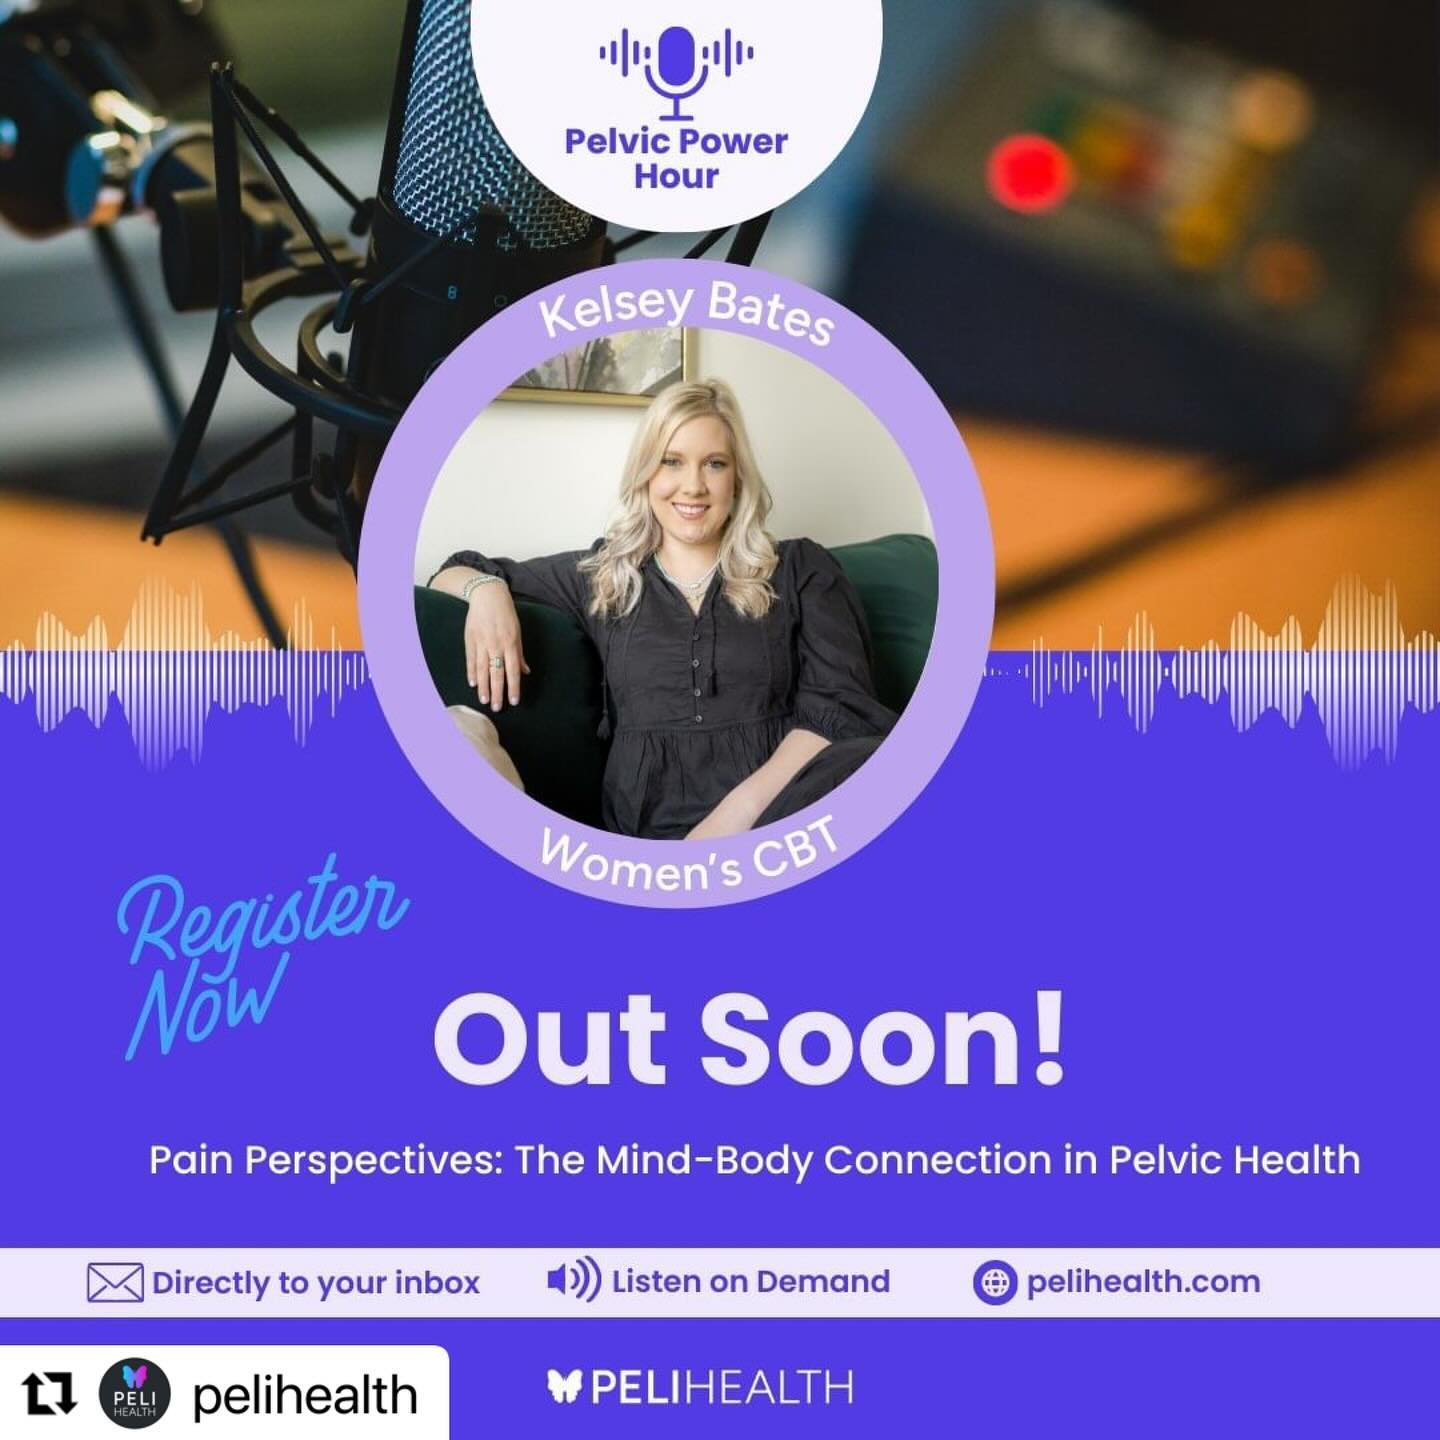 #Repost @pelihealth with @use.repost
・・・
🌟 Join us for an exclusive online event with Kelsey Bates, a licensed psychotherapist specializing in women&rsquo;s health and founder of @womenscbt. Kelsey offers therapy to women experiencing chronic illnes